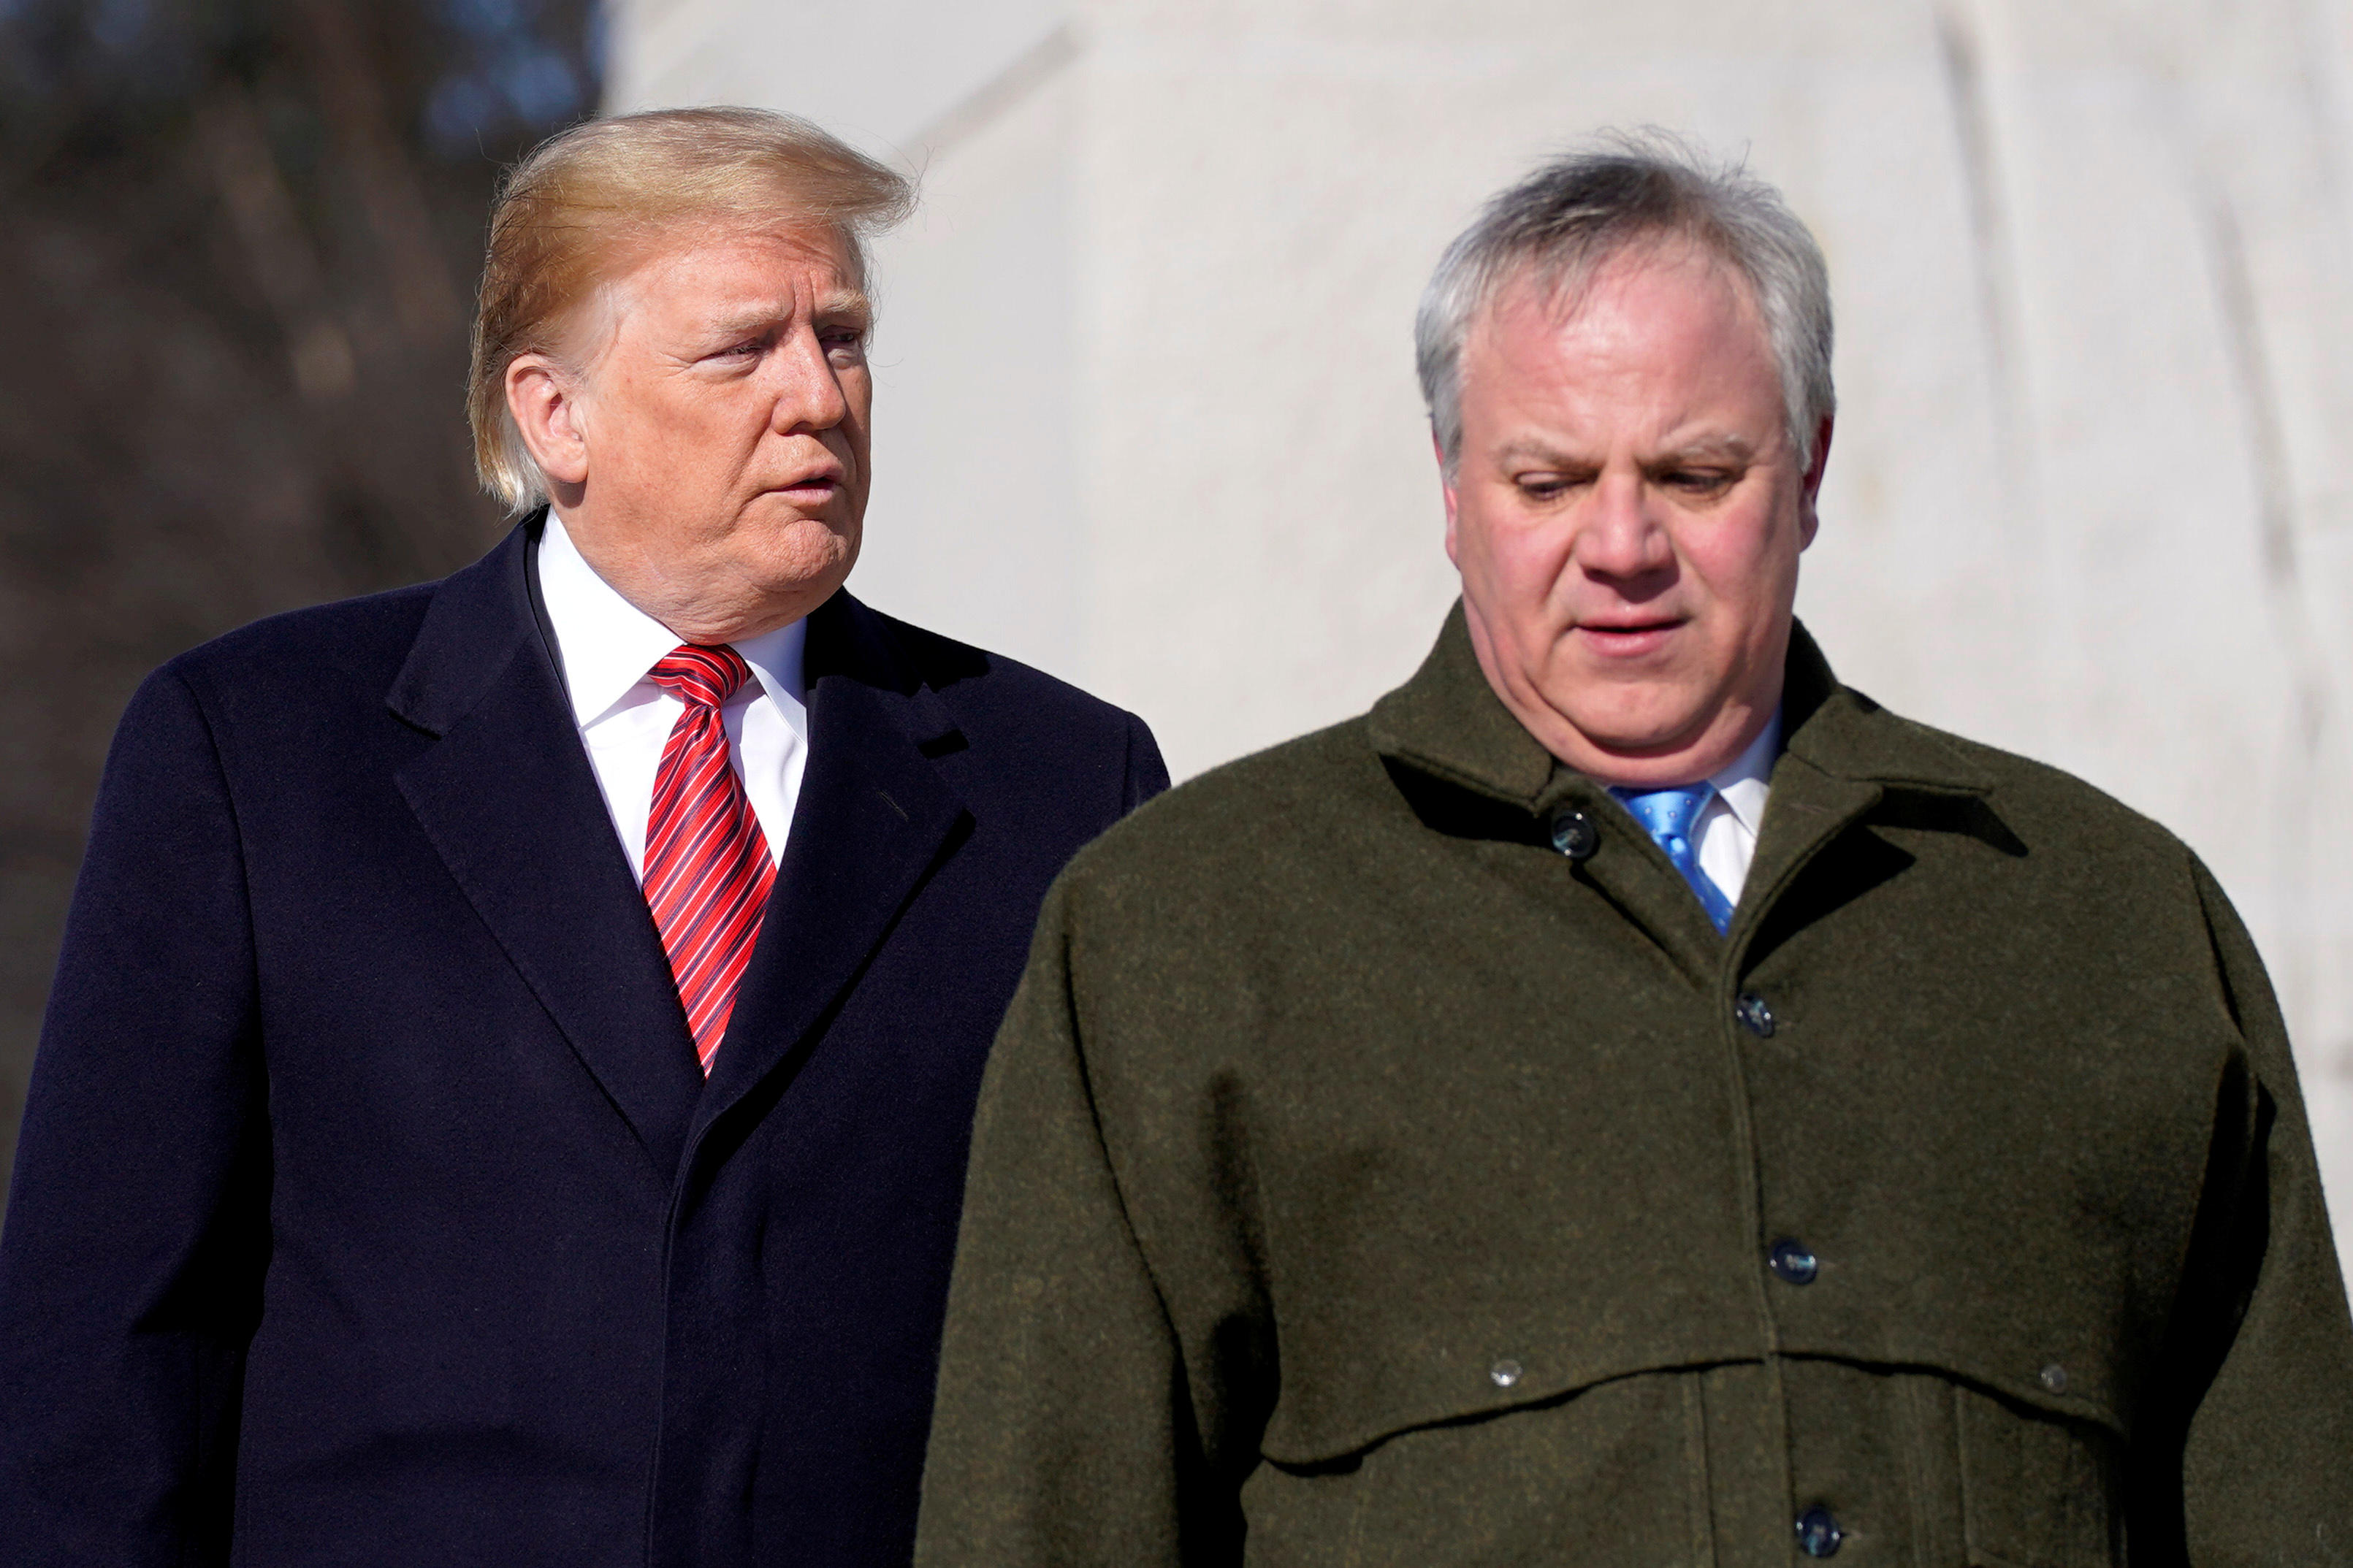 U.S. President Donald Trump and acting U.S. Secretary of Interior David Bernhardt arrive to place a wreath at the Martin Luther King Memorial in Washington, U.S., January 21, 2019. REUTERS/Joshua Roberts